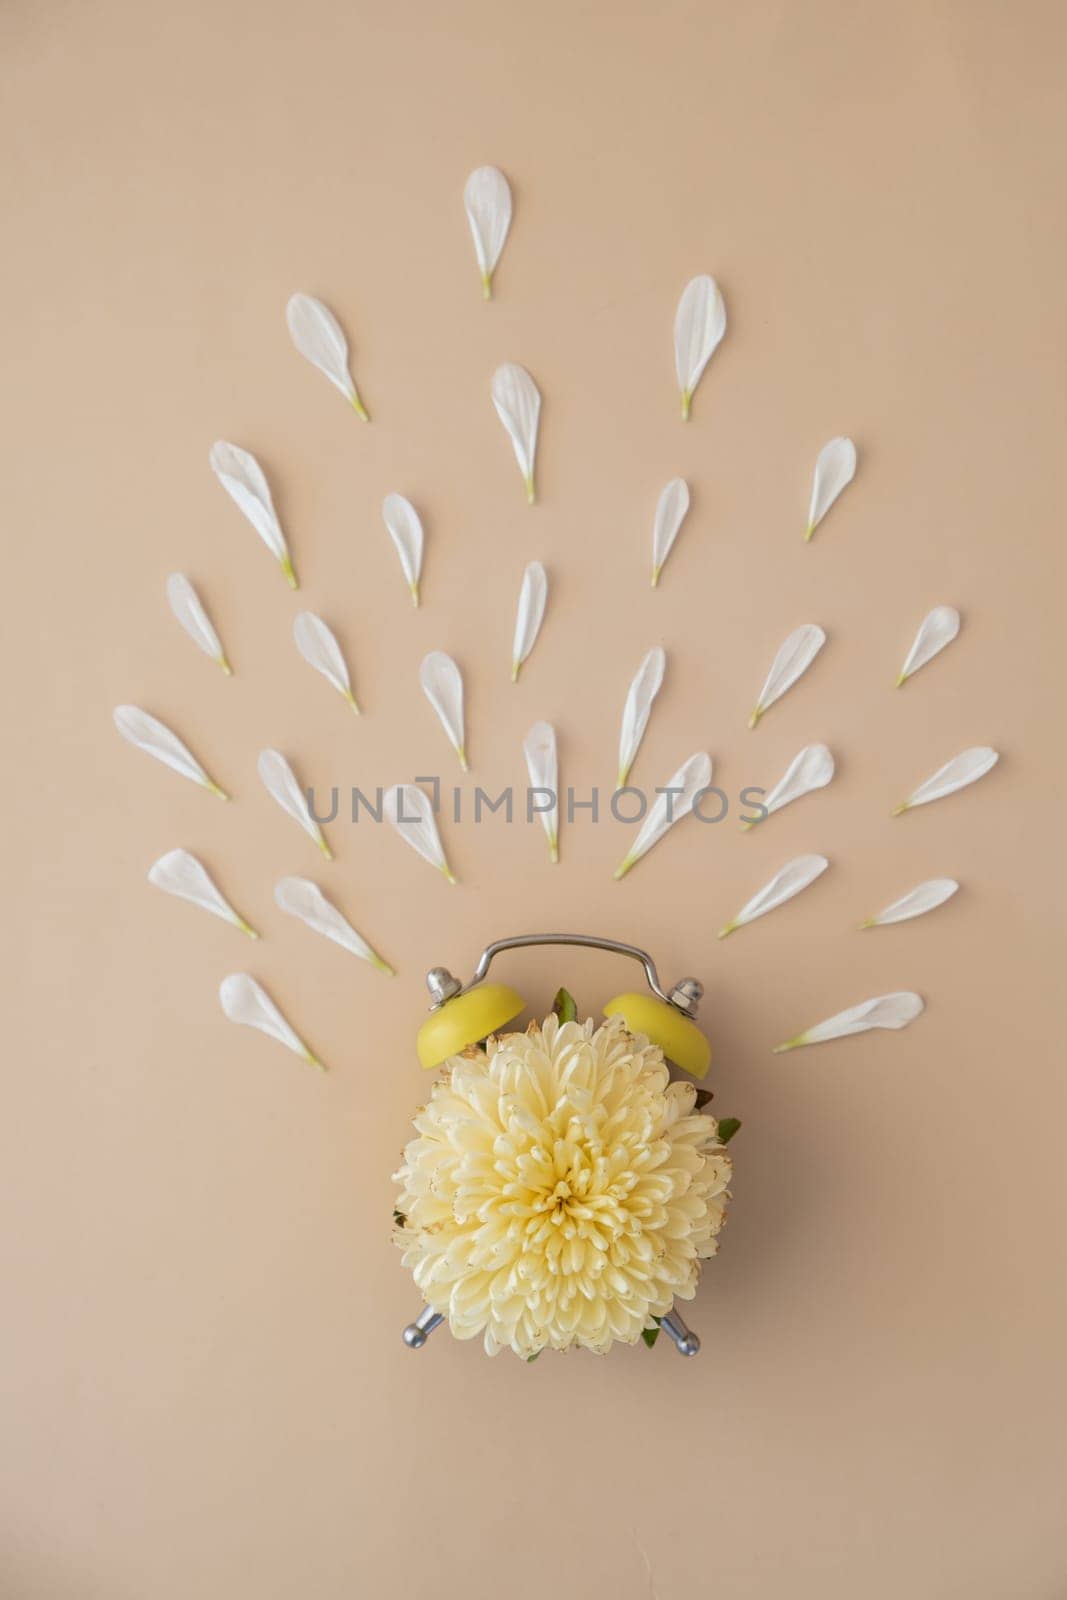 Composition of flower and alarm clock. Concept of changing summer winter time on beige background. Flat lay, top view